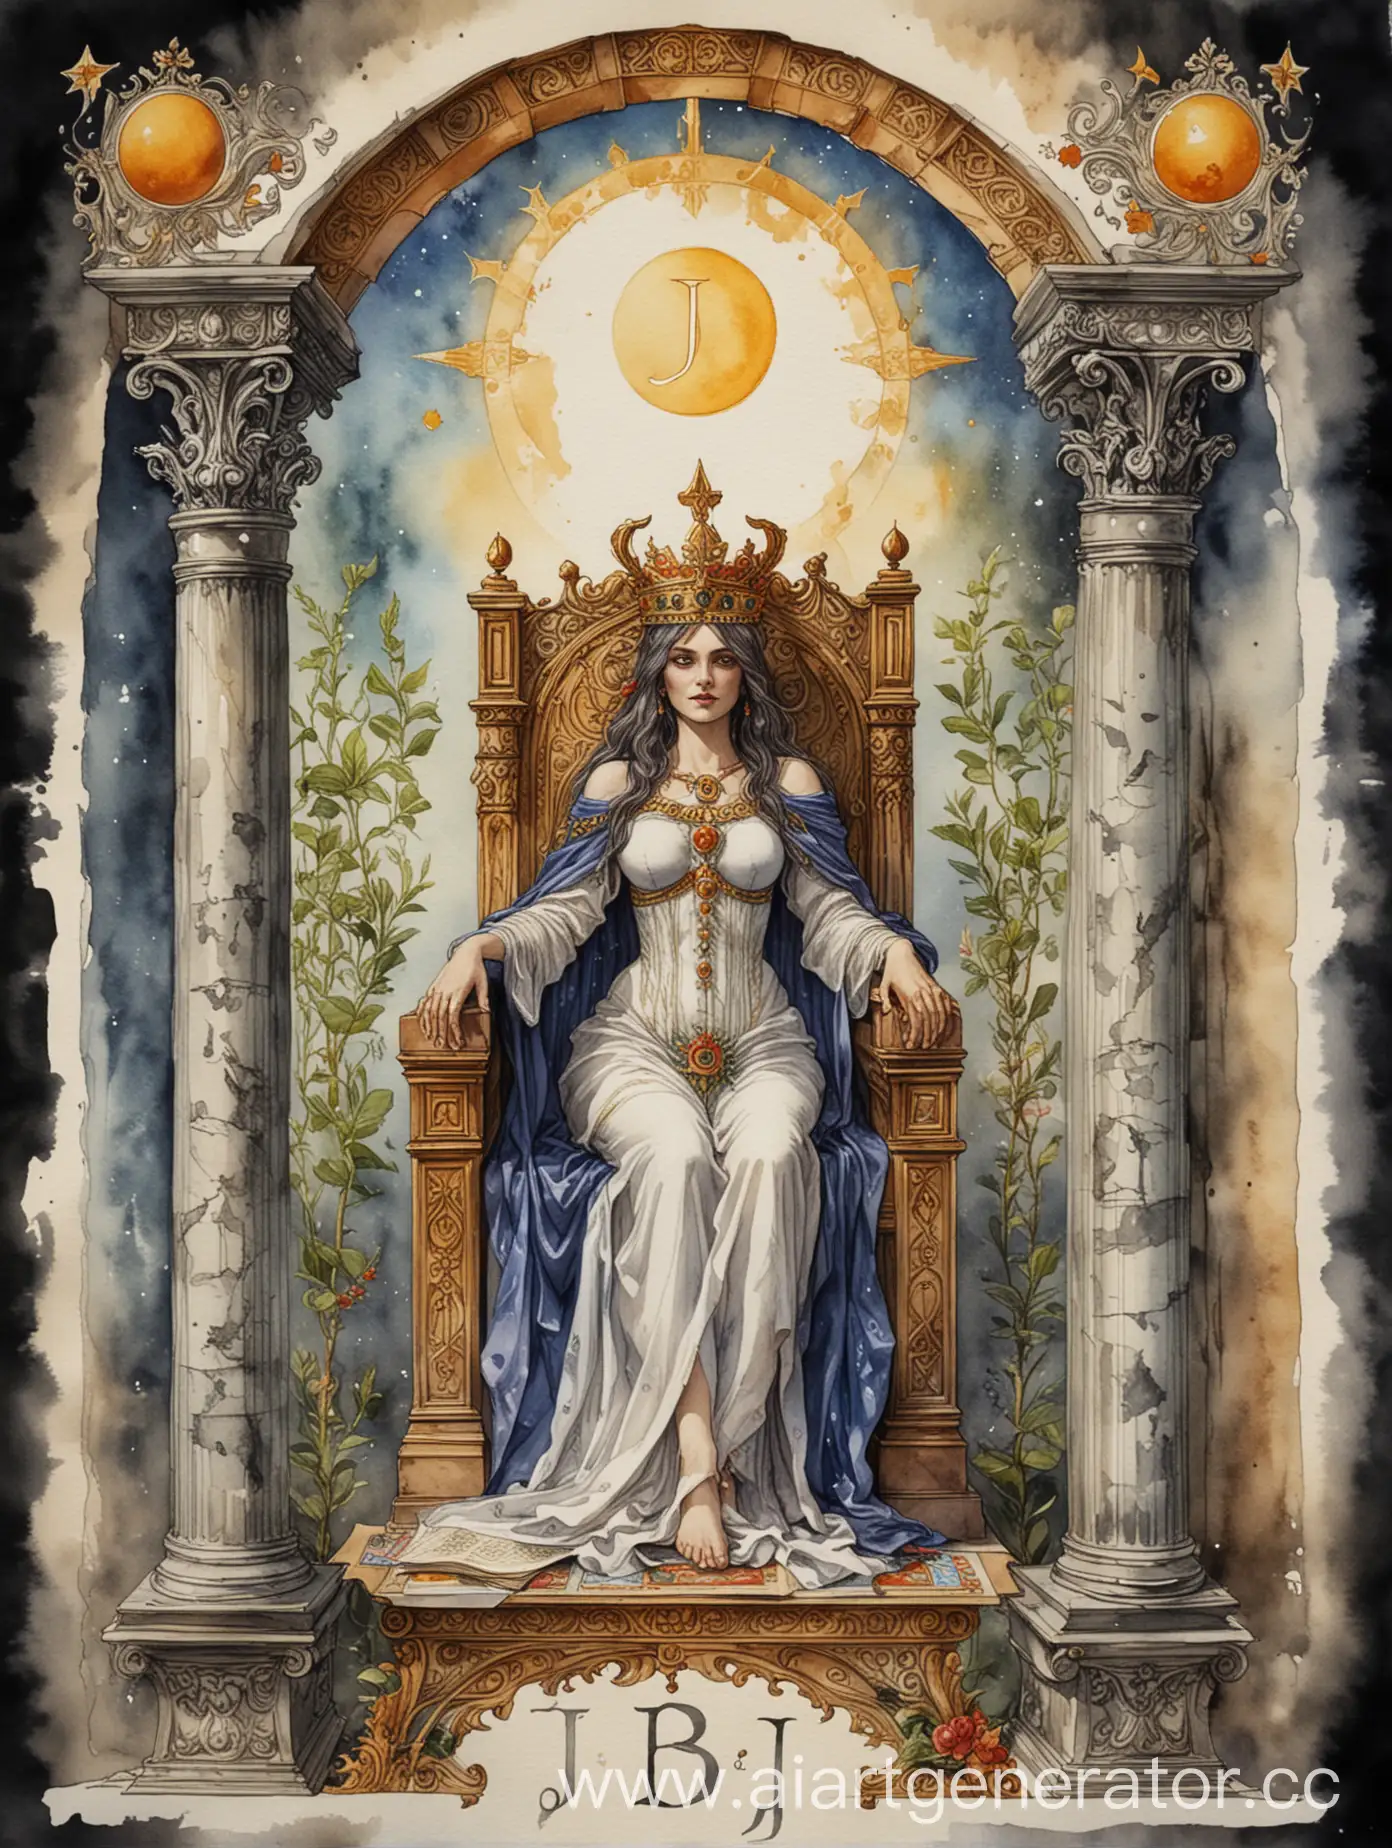 Watercolor-Tarot-Art-Arcanum-Priestess-with-Crescent-Headpiece-and-Open-Book-on-Throne